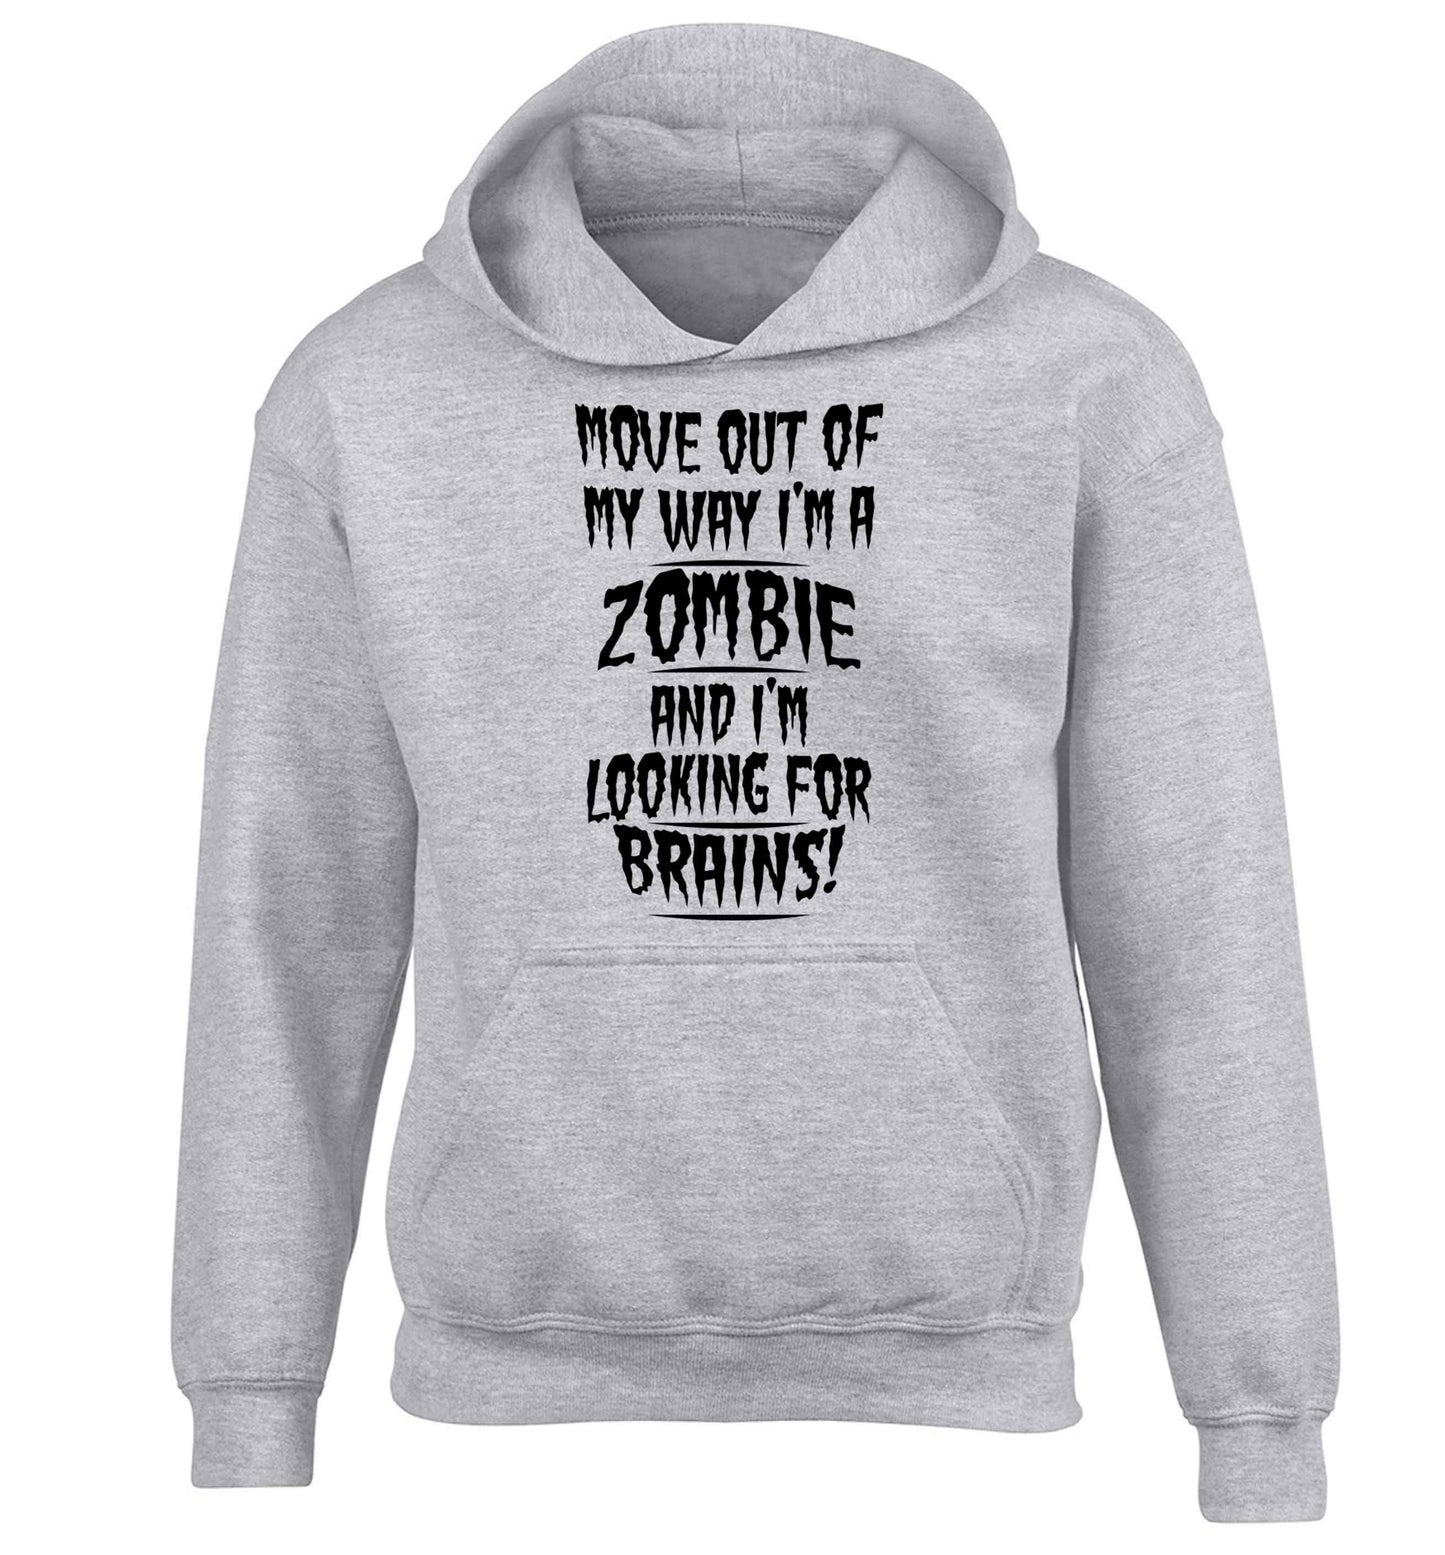 I'm a zombie and I'm looking for brains! children's grey hoodie 12-13 Years